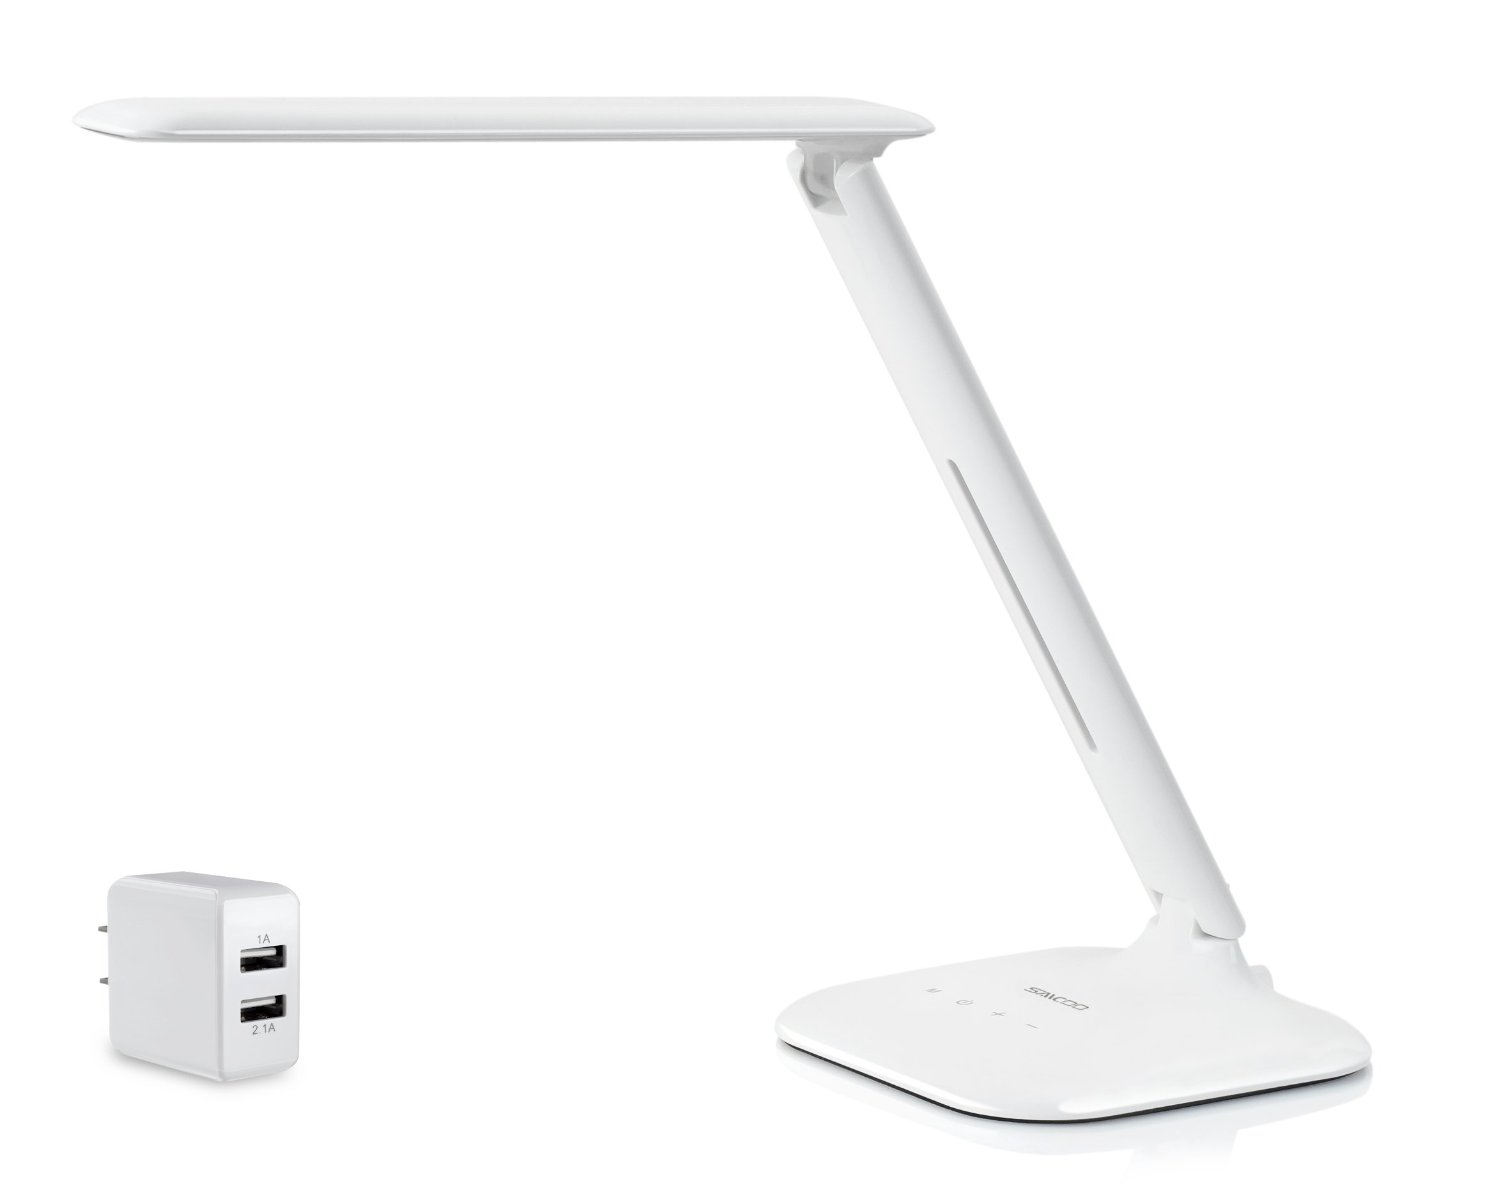 Top 10 Best Led Desk Lamp In 2019 Clamp Lamp Reviews inside proportions 1500 X 1184